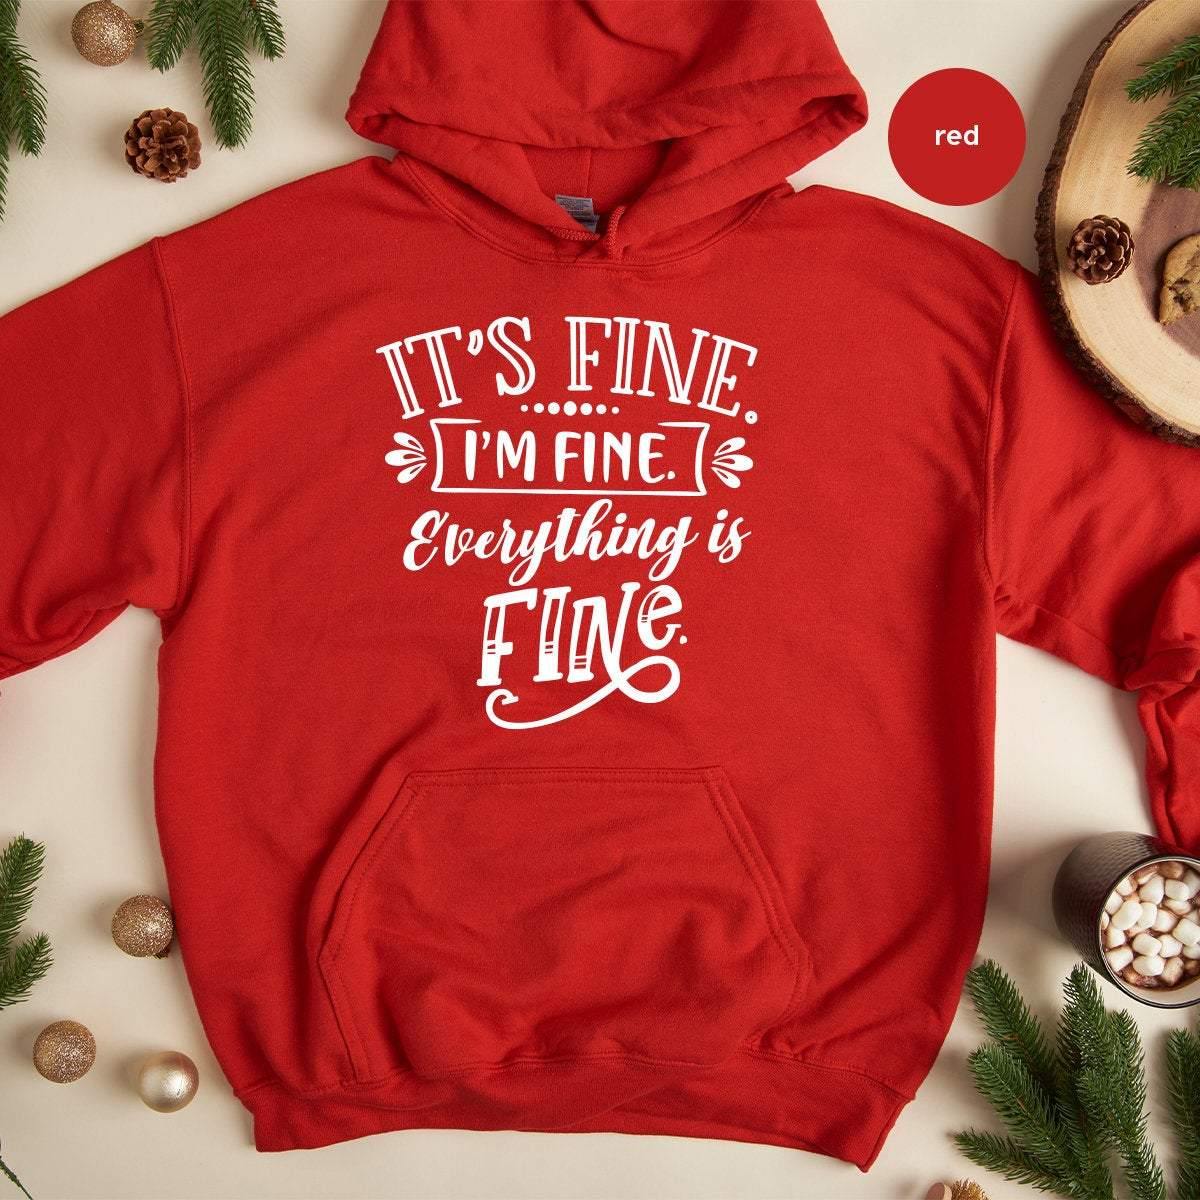 Funny Anxiety Hoodie, Funny Sarcastic Hoodie, It's Fine I'm Fine Everything Is Fine, Anxiety Hoodie, Motivational Hoodie, Introvert Hoodie - Fastdeliverytees.com